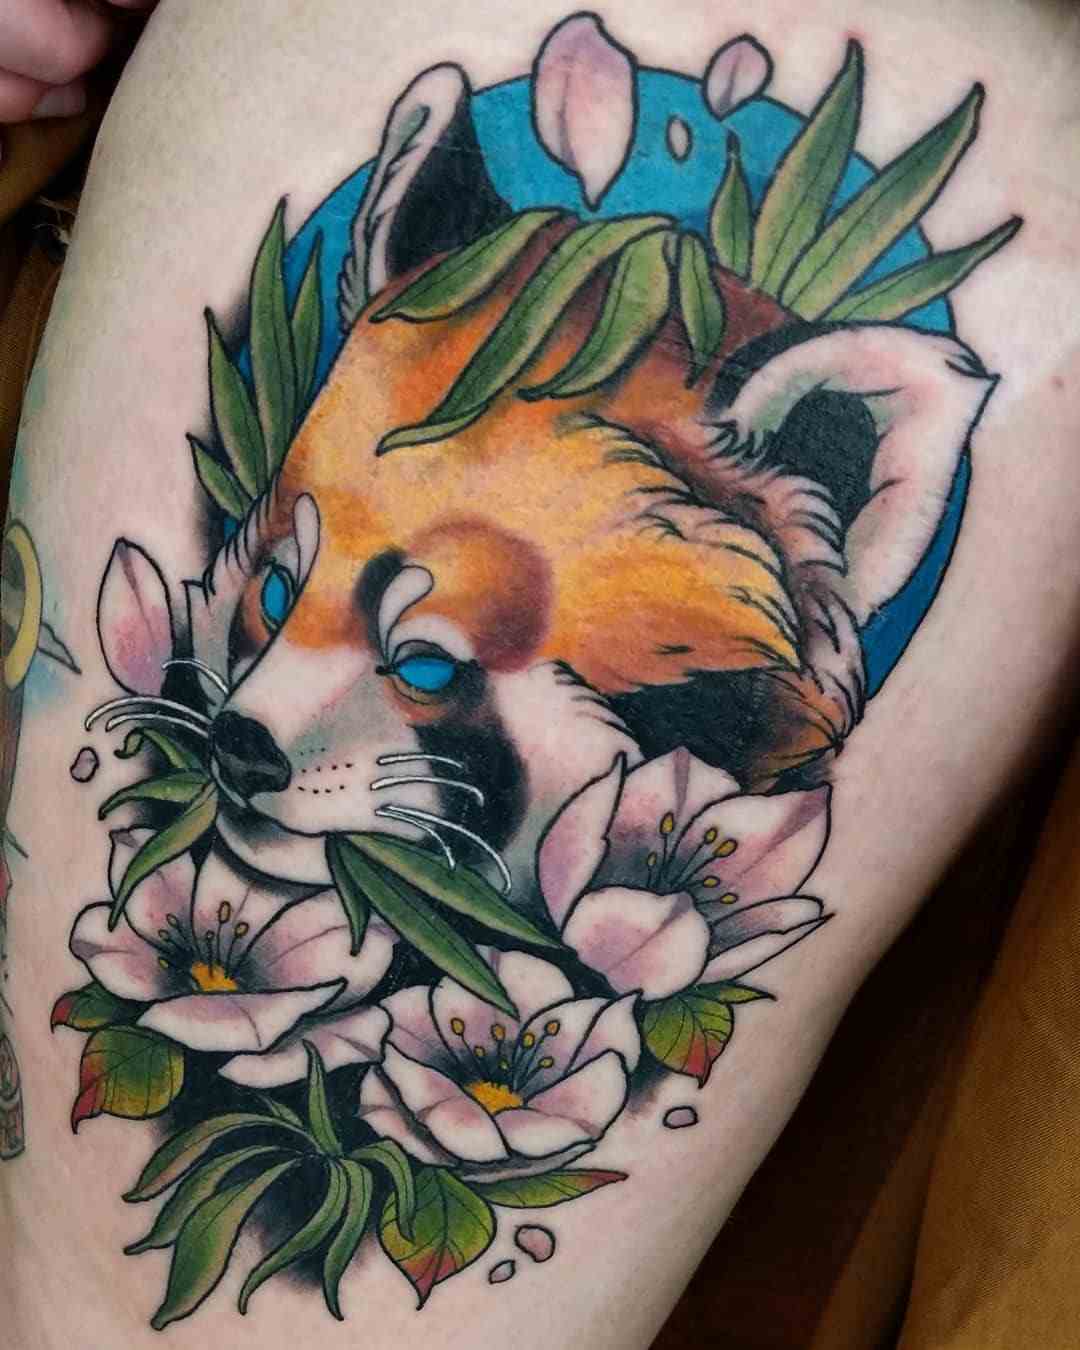 Panda Tattoo Inspiration for women with flowers in bundles of colors